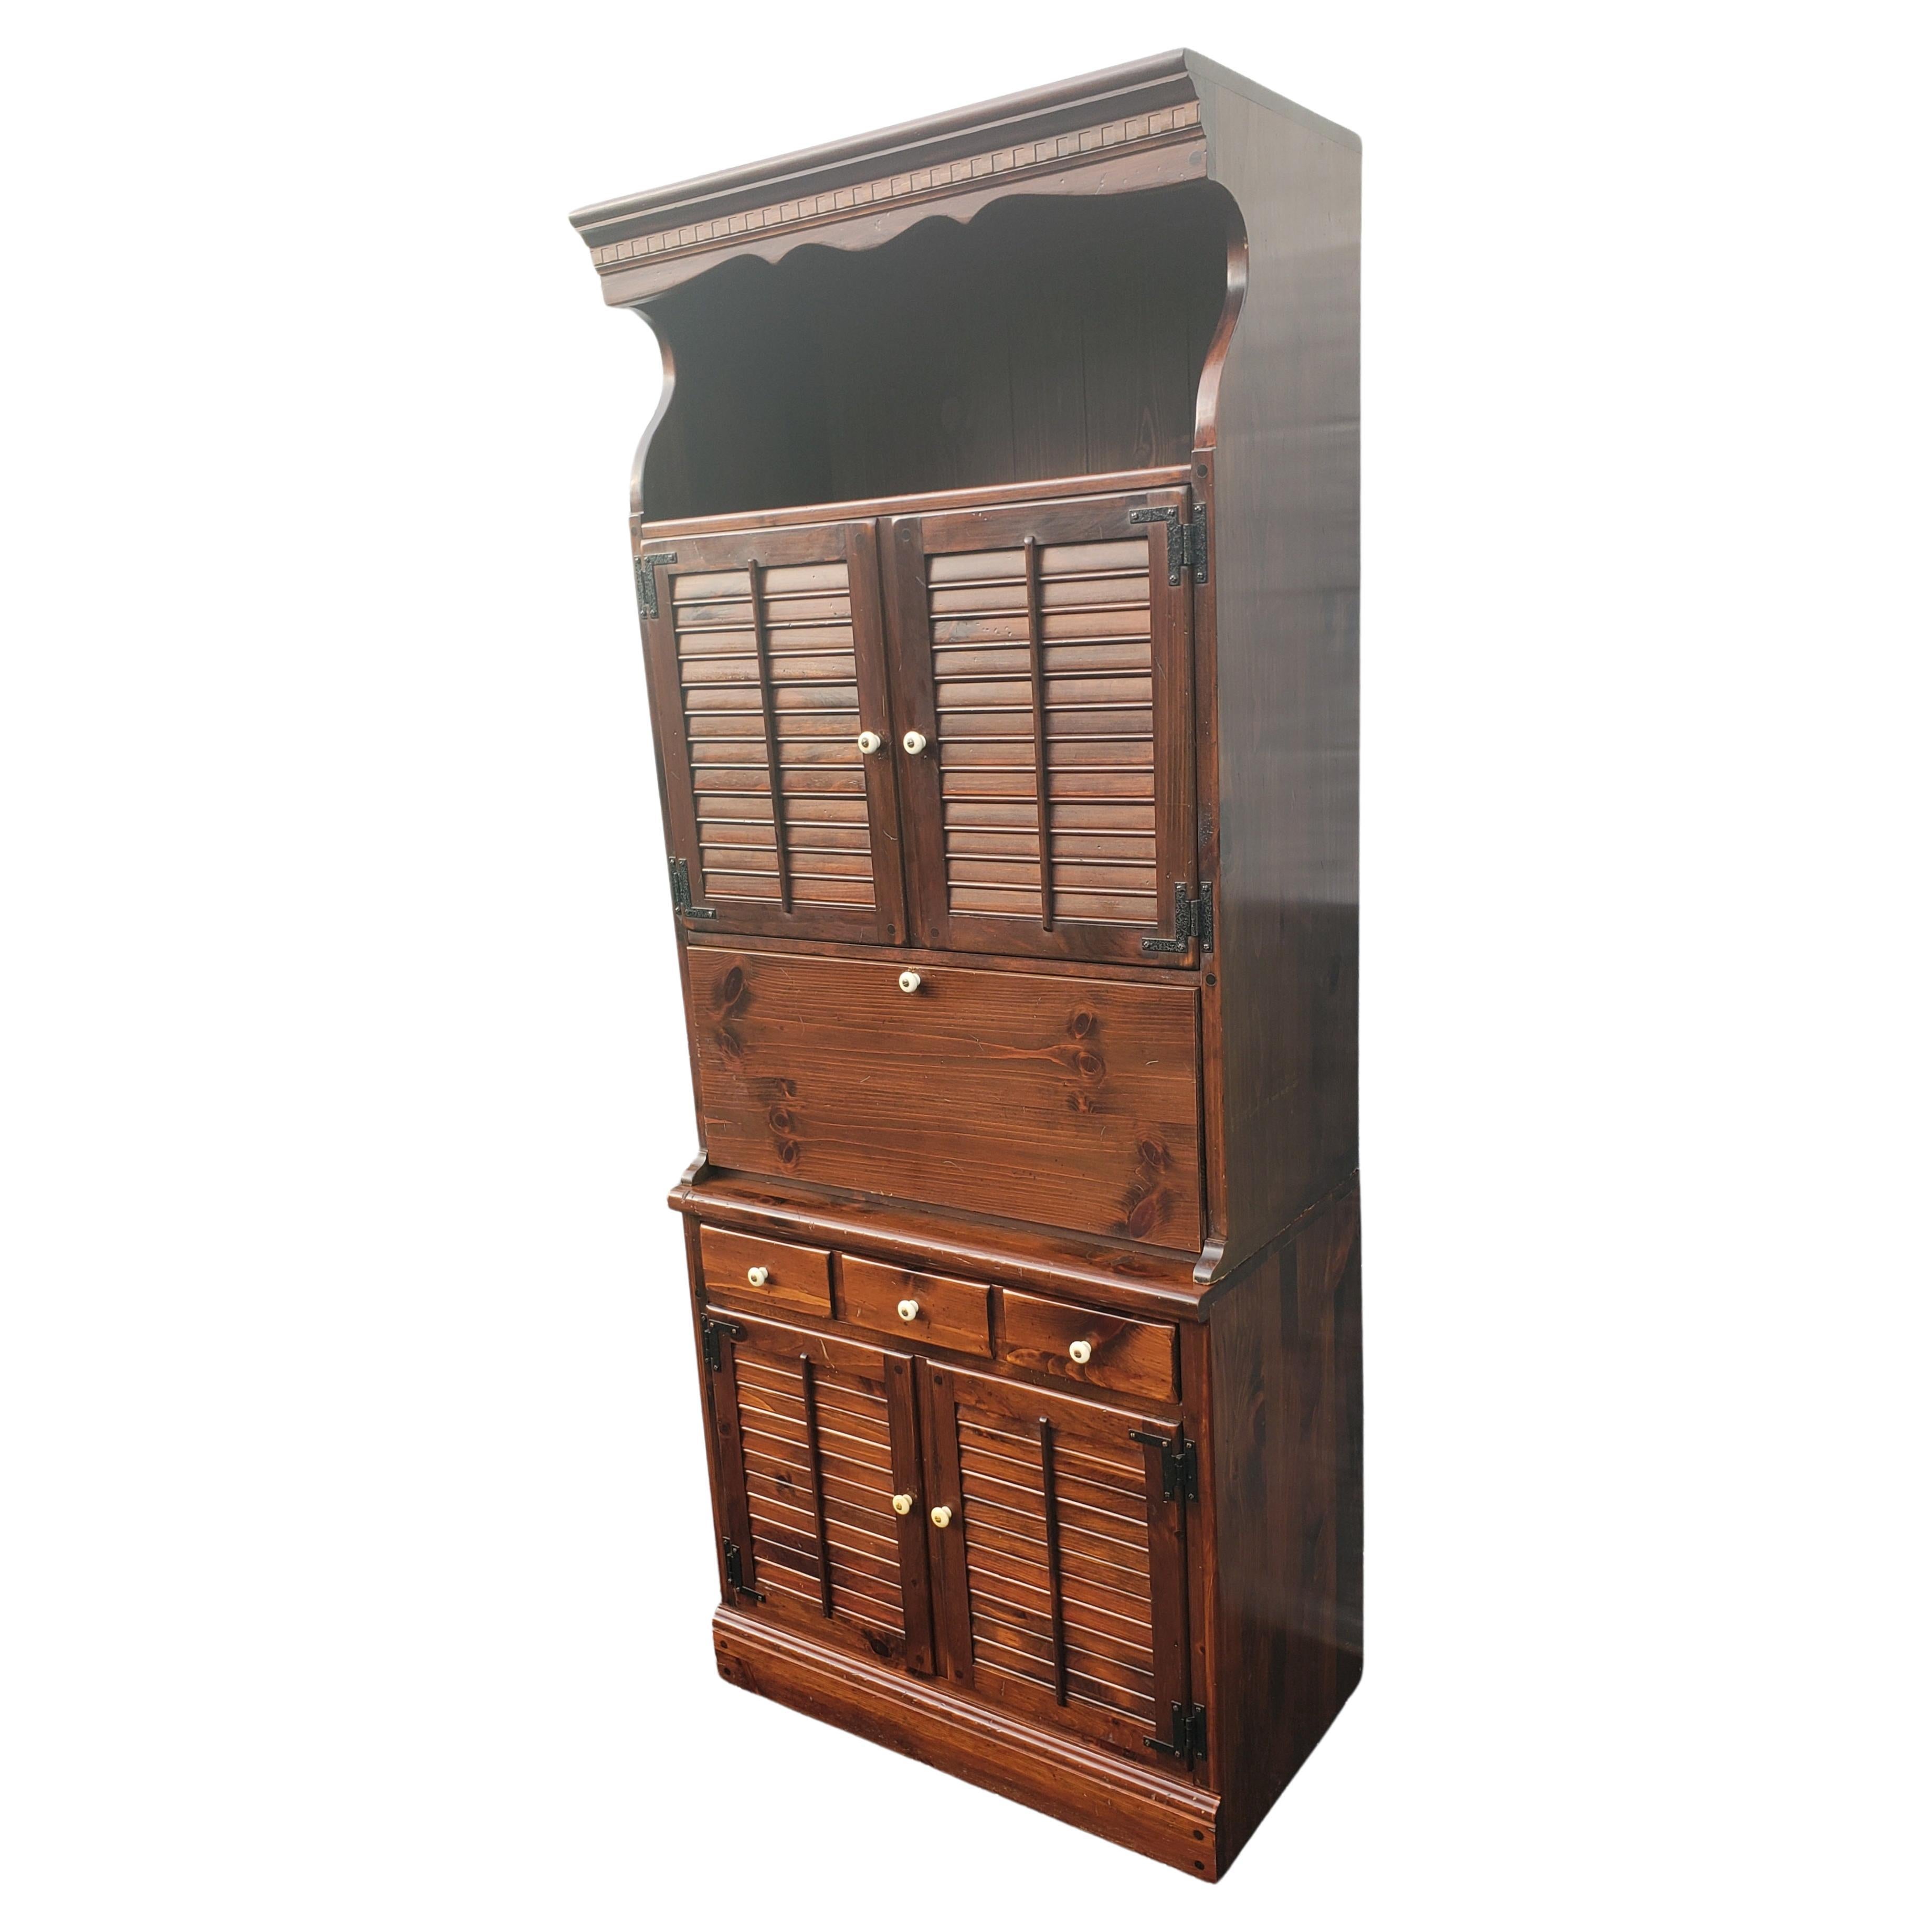 Beautiful Ethan Allen Antiqued Pine lighted Cabinet with hutch. Hutch just seat on the base cabinet and can be used as a separate piece of furniture for displaying or as a bookcase. The base cabinet is has a large storage area under a single drawer.